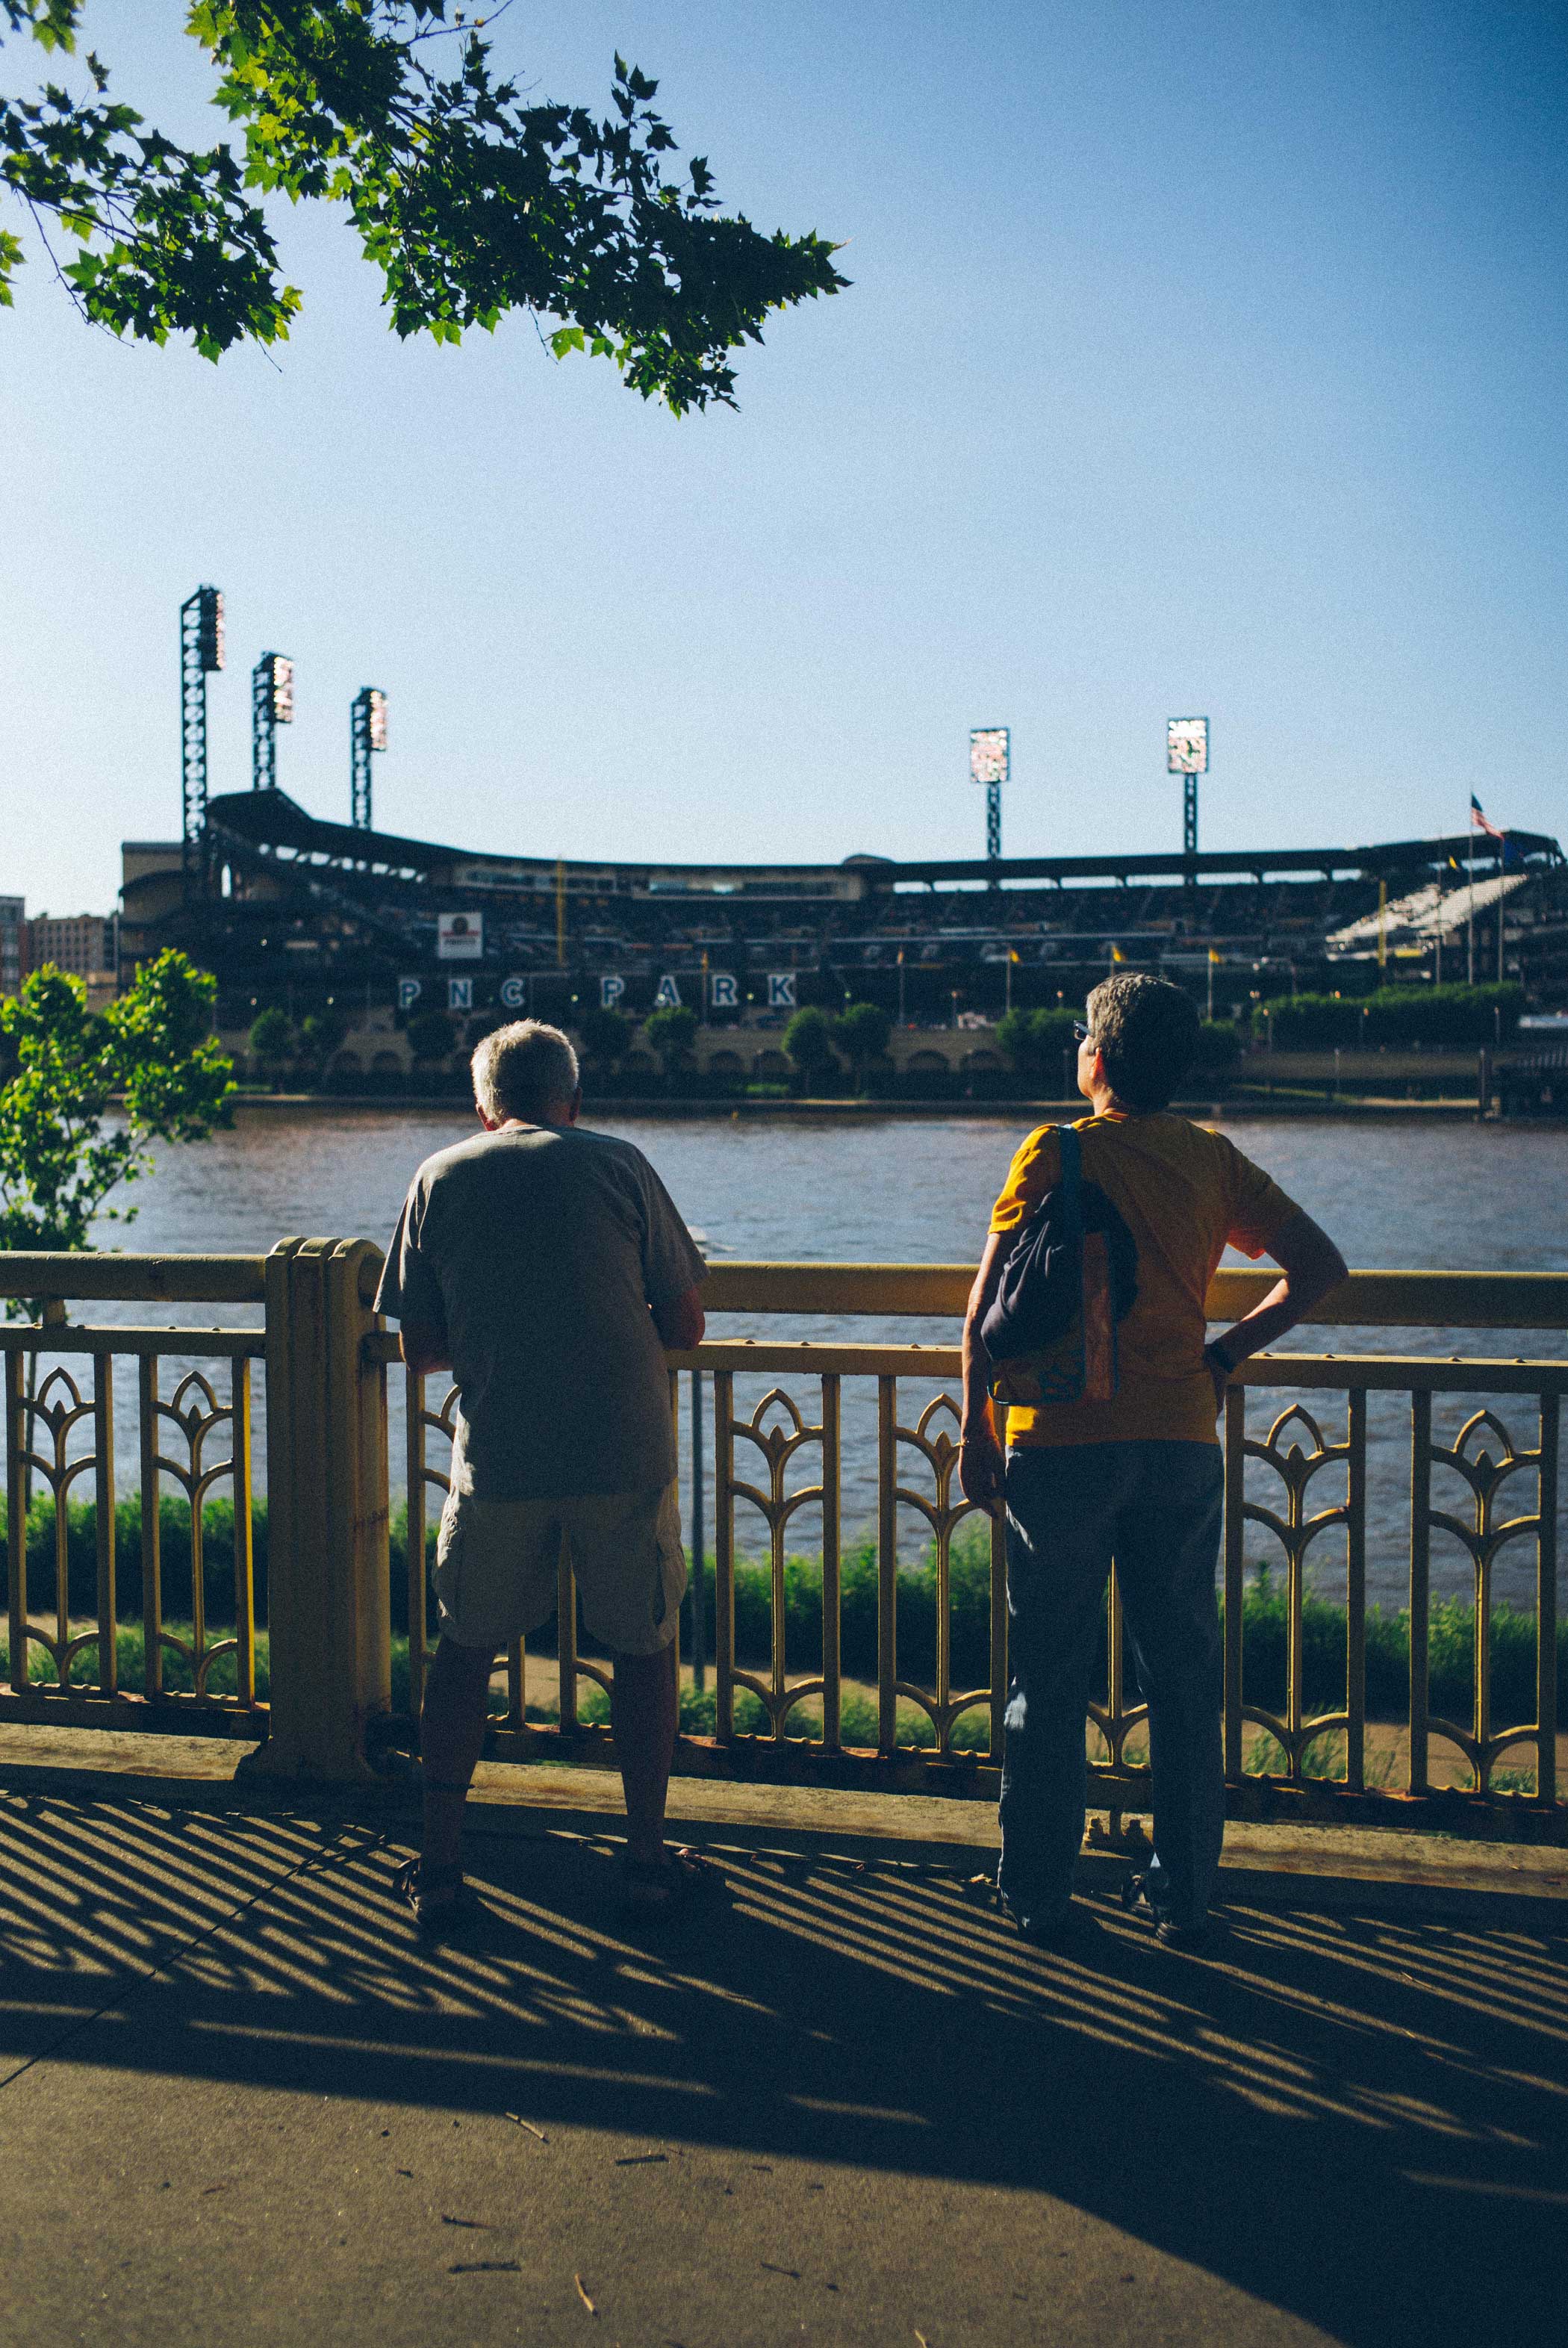 A view of PNC Park on June 24, 2015.